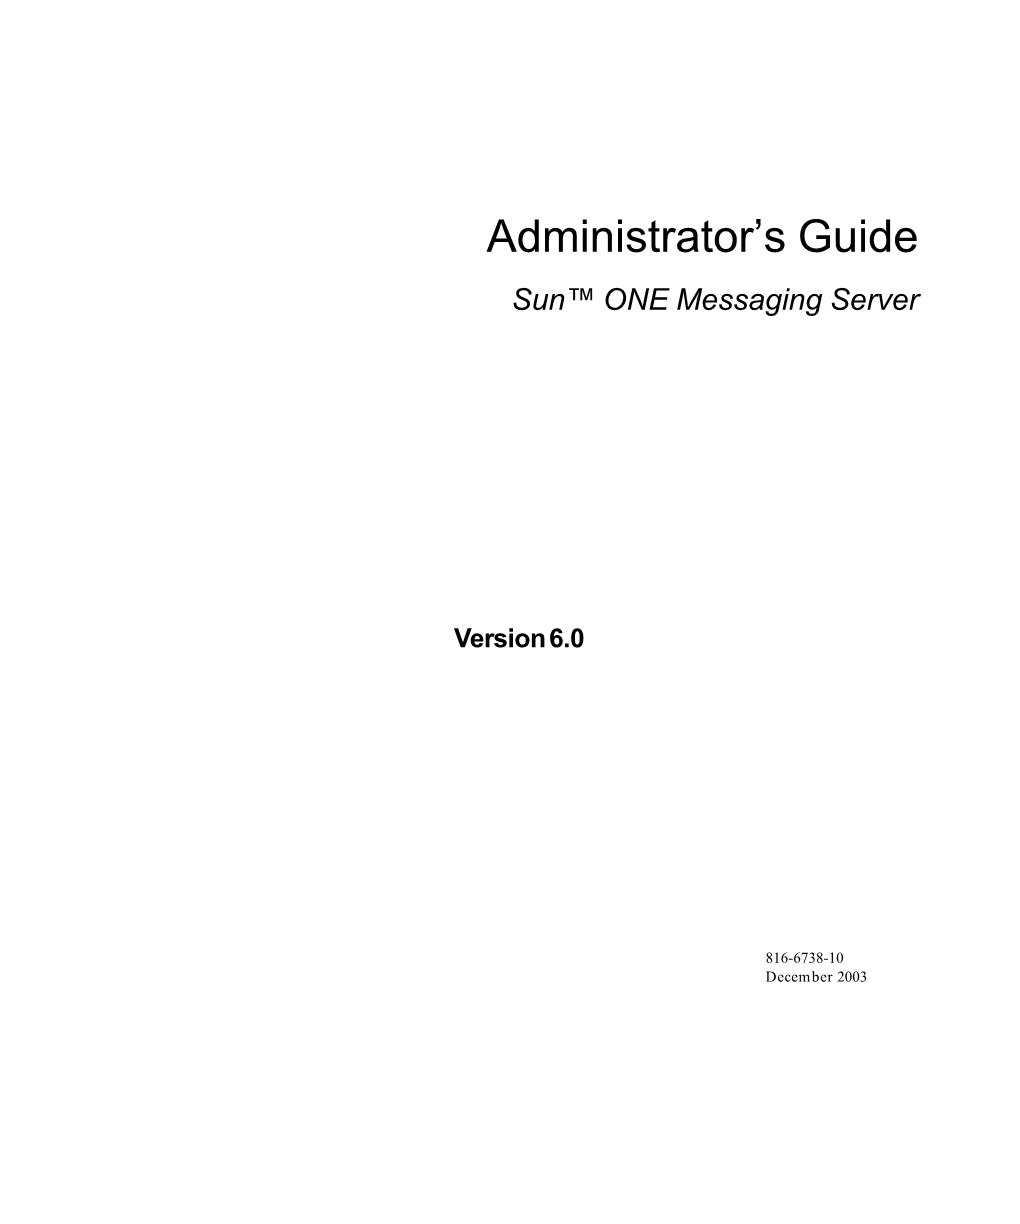 Sun ONE Messaging Server 6.0 Administrator's Guide